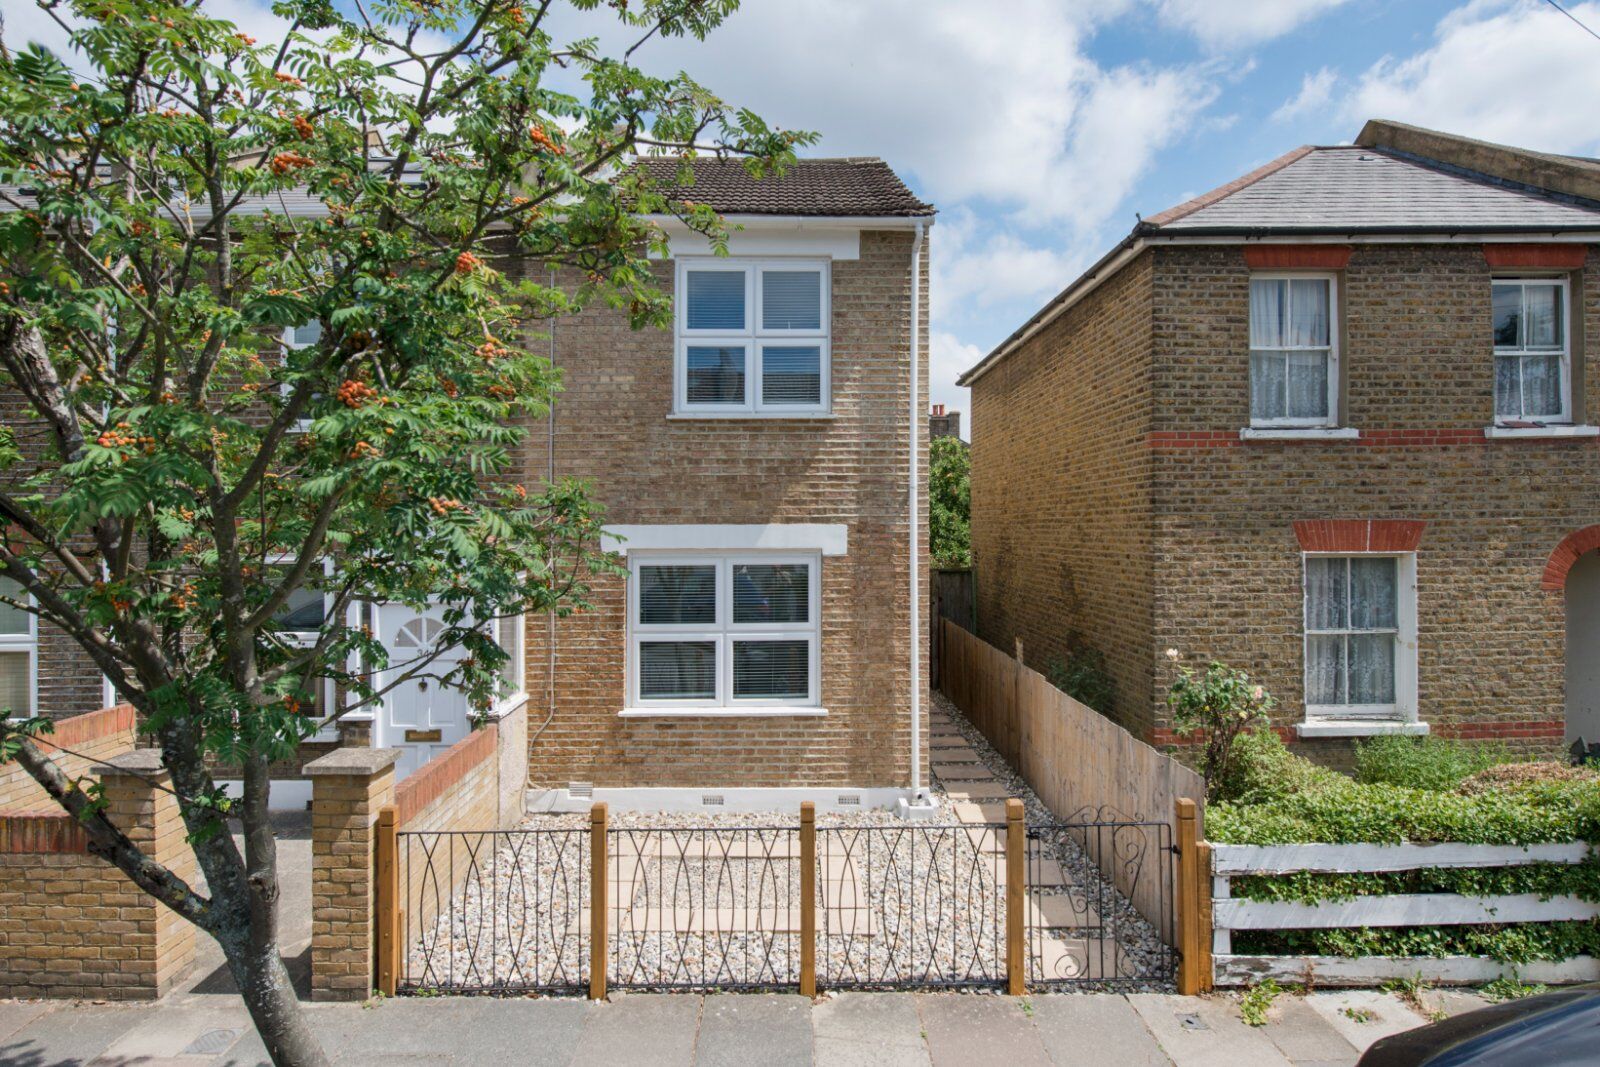 2 bedroom end terraced house for sale Palmerston Road, London, SW19, main image